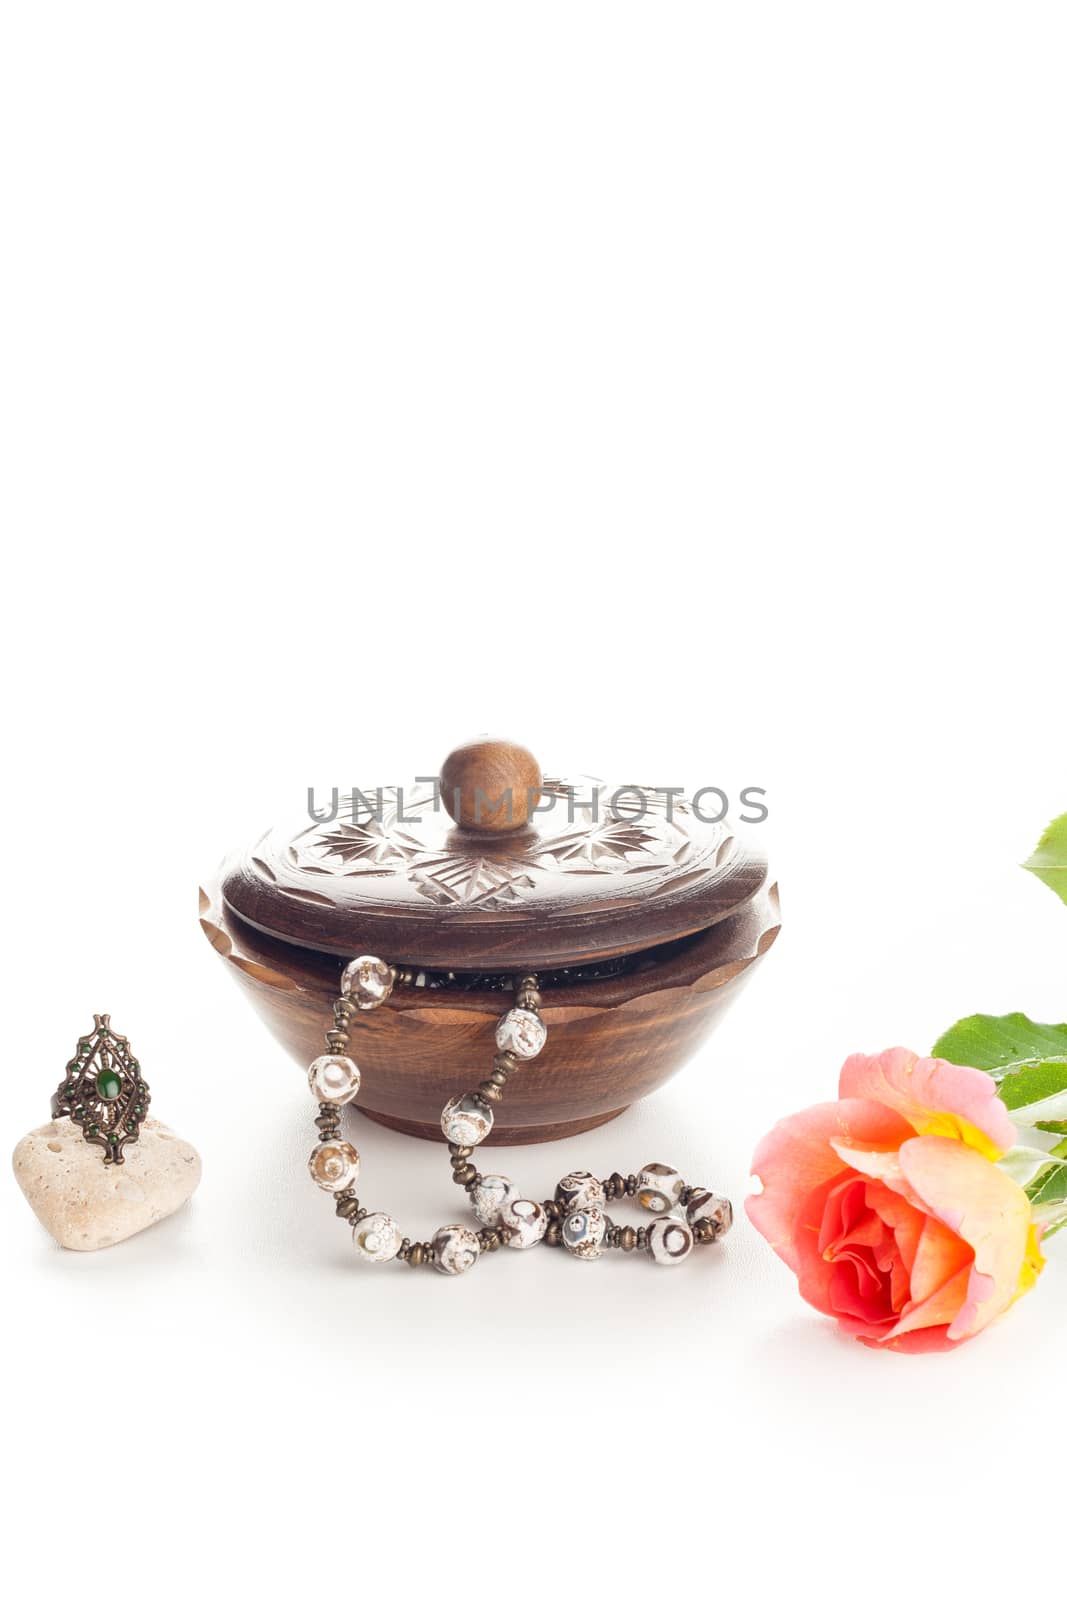 vintage necklace and ring with wooden jewelry box and rose